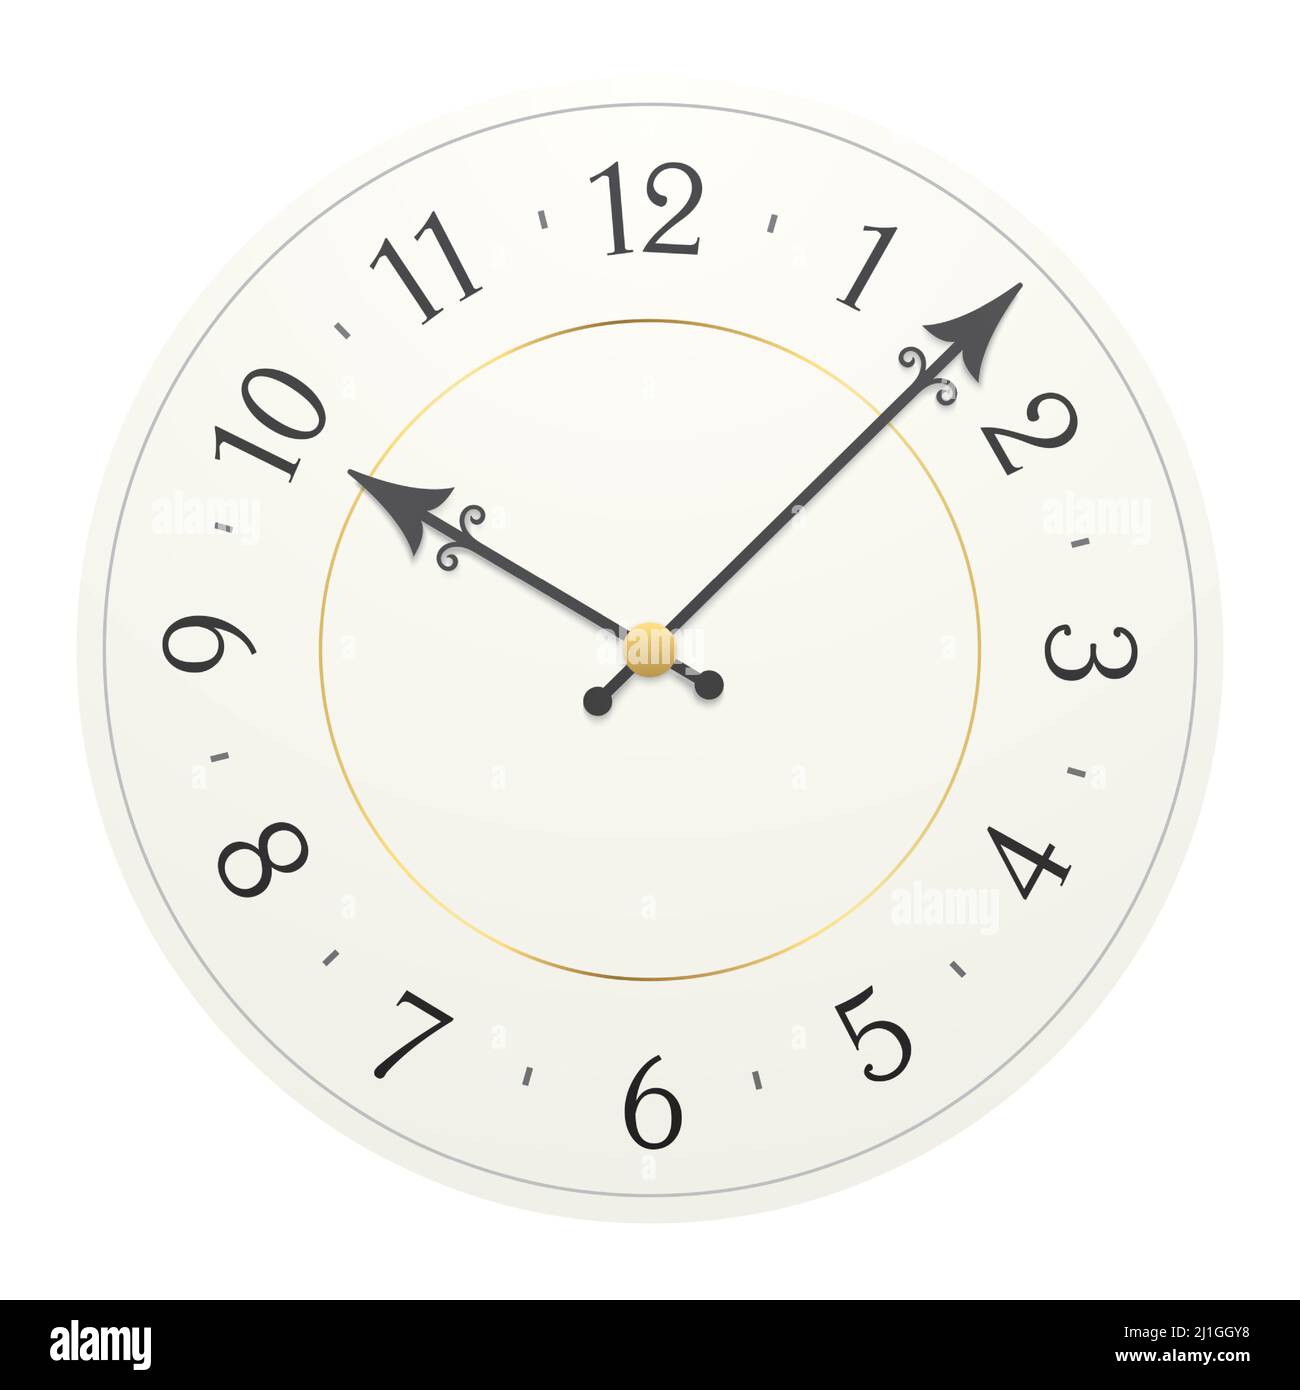 Retro watch dial isolated on white background. Classical black watch face with numbers and arrows, vector illustration. Stock Vector